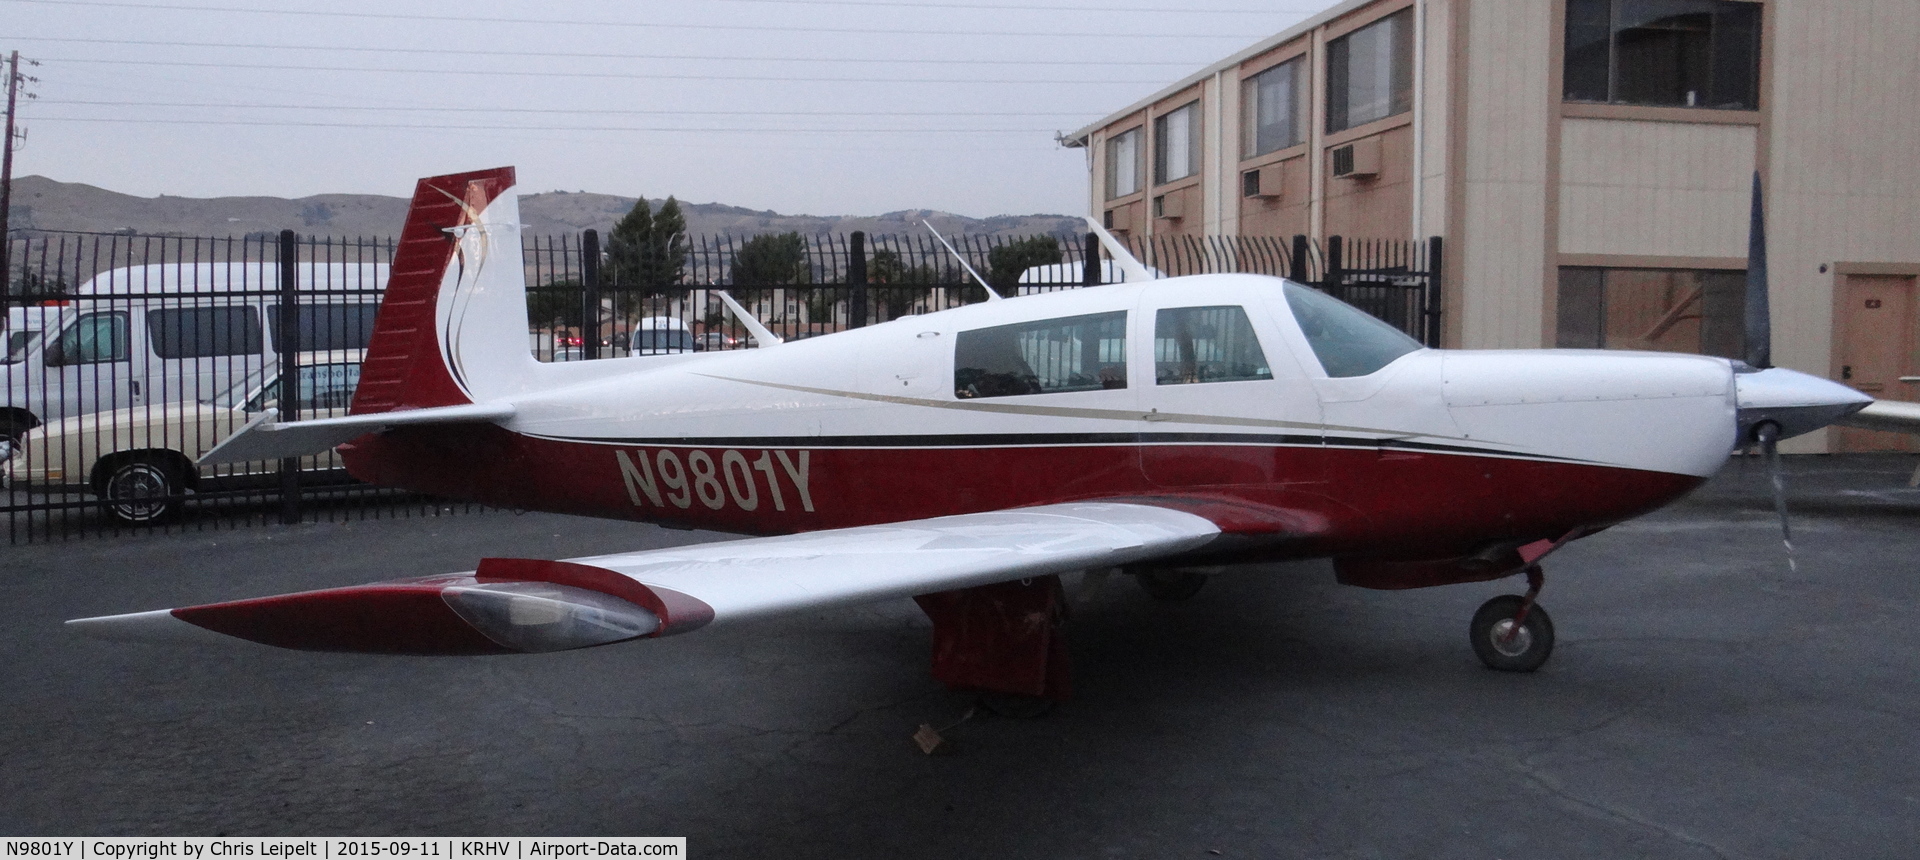 N9801Y, 1981 Mooney M20K C/N 25-0526, Locally-based 1981 Mooney M20K for sale with Lafferty Aircraft Sales at Reid Hillview Airport, San Jose, CA.